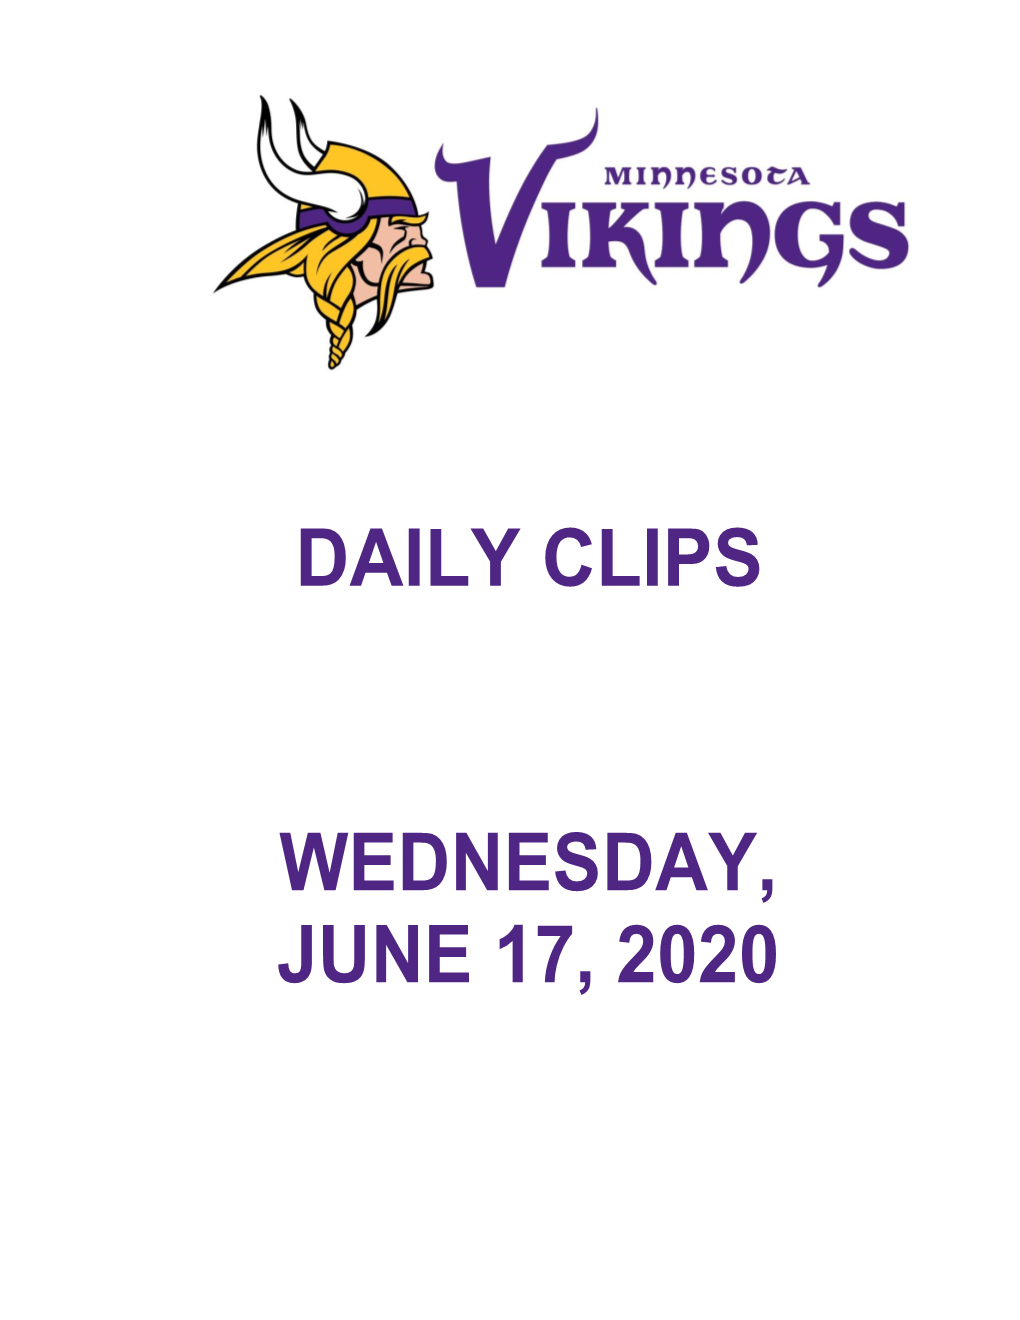 Daily Clips Wednesday, June 17, 2020